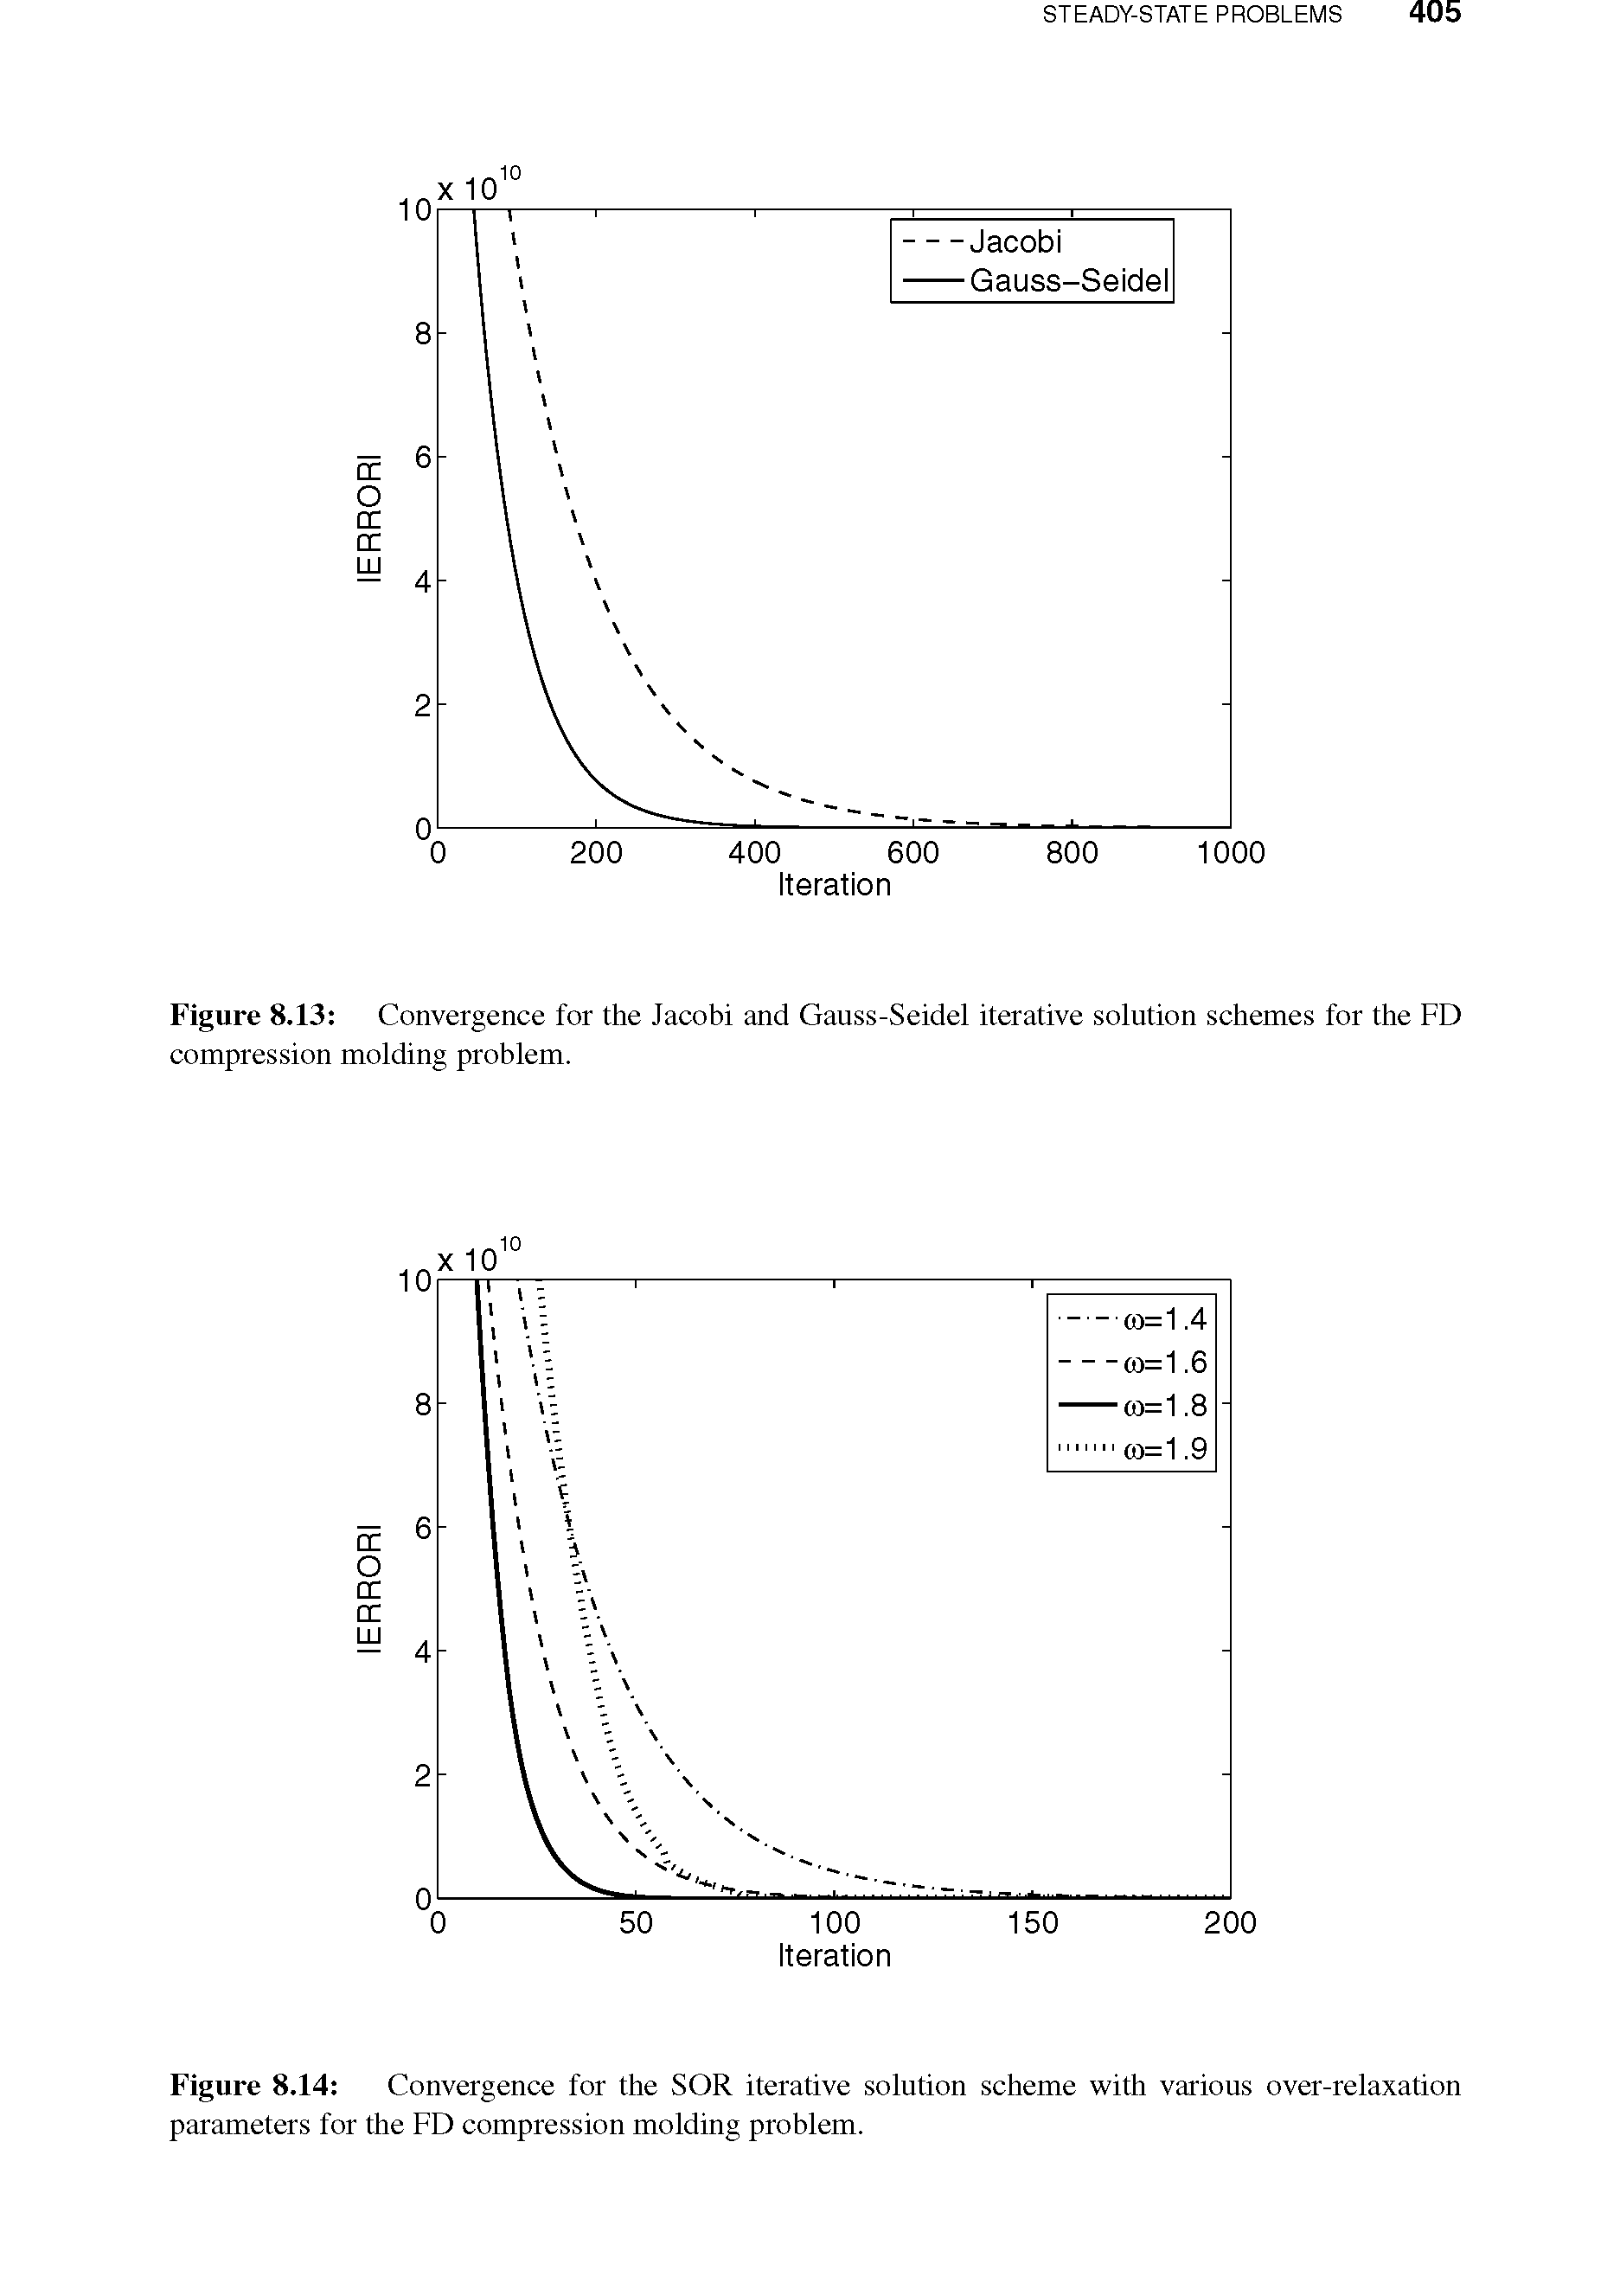 Figure 8.14 Convergence for the SOR iterative solution scheme with various over-relaxation parameters for the FD compression molding problem.